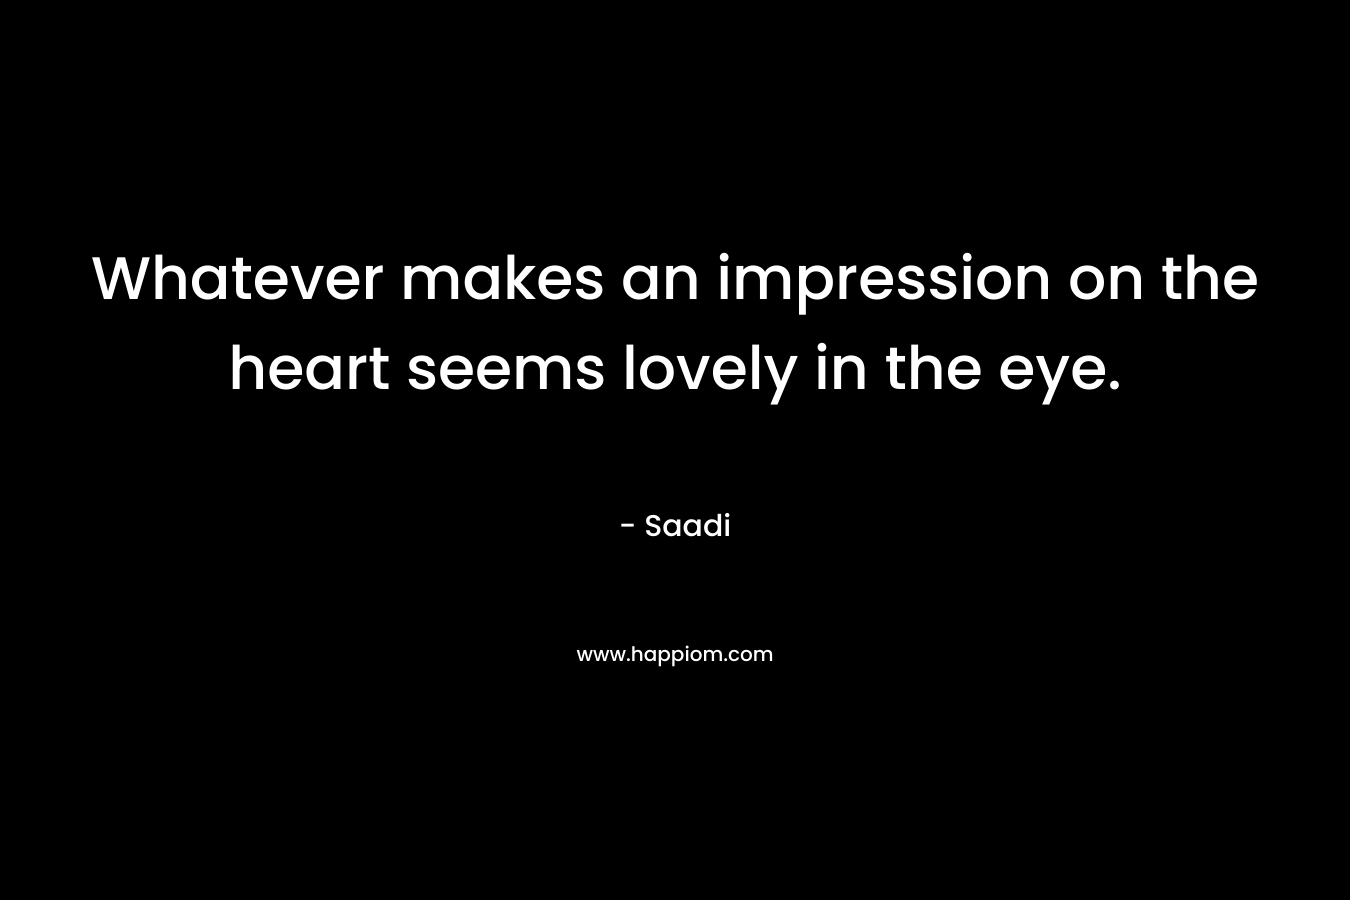 Whatever makes an impression on the heart seems lovely in the eye. – Saadi